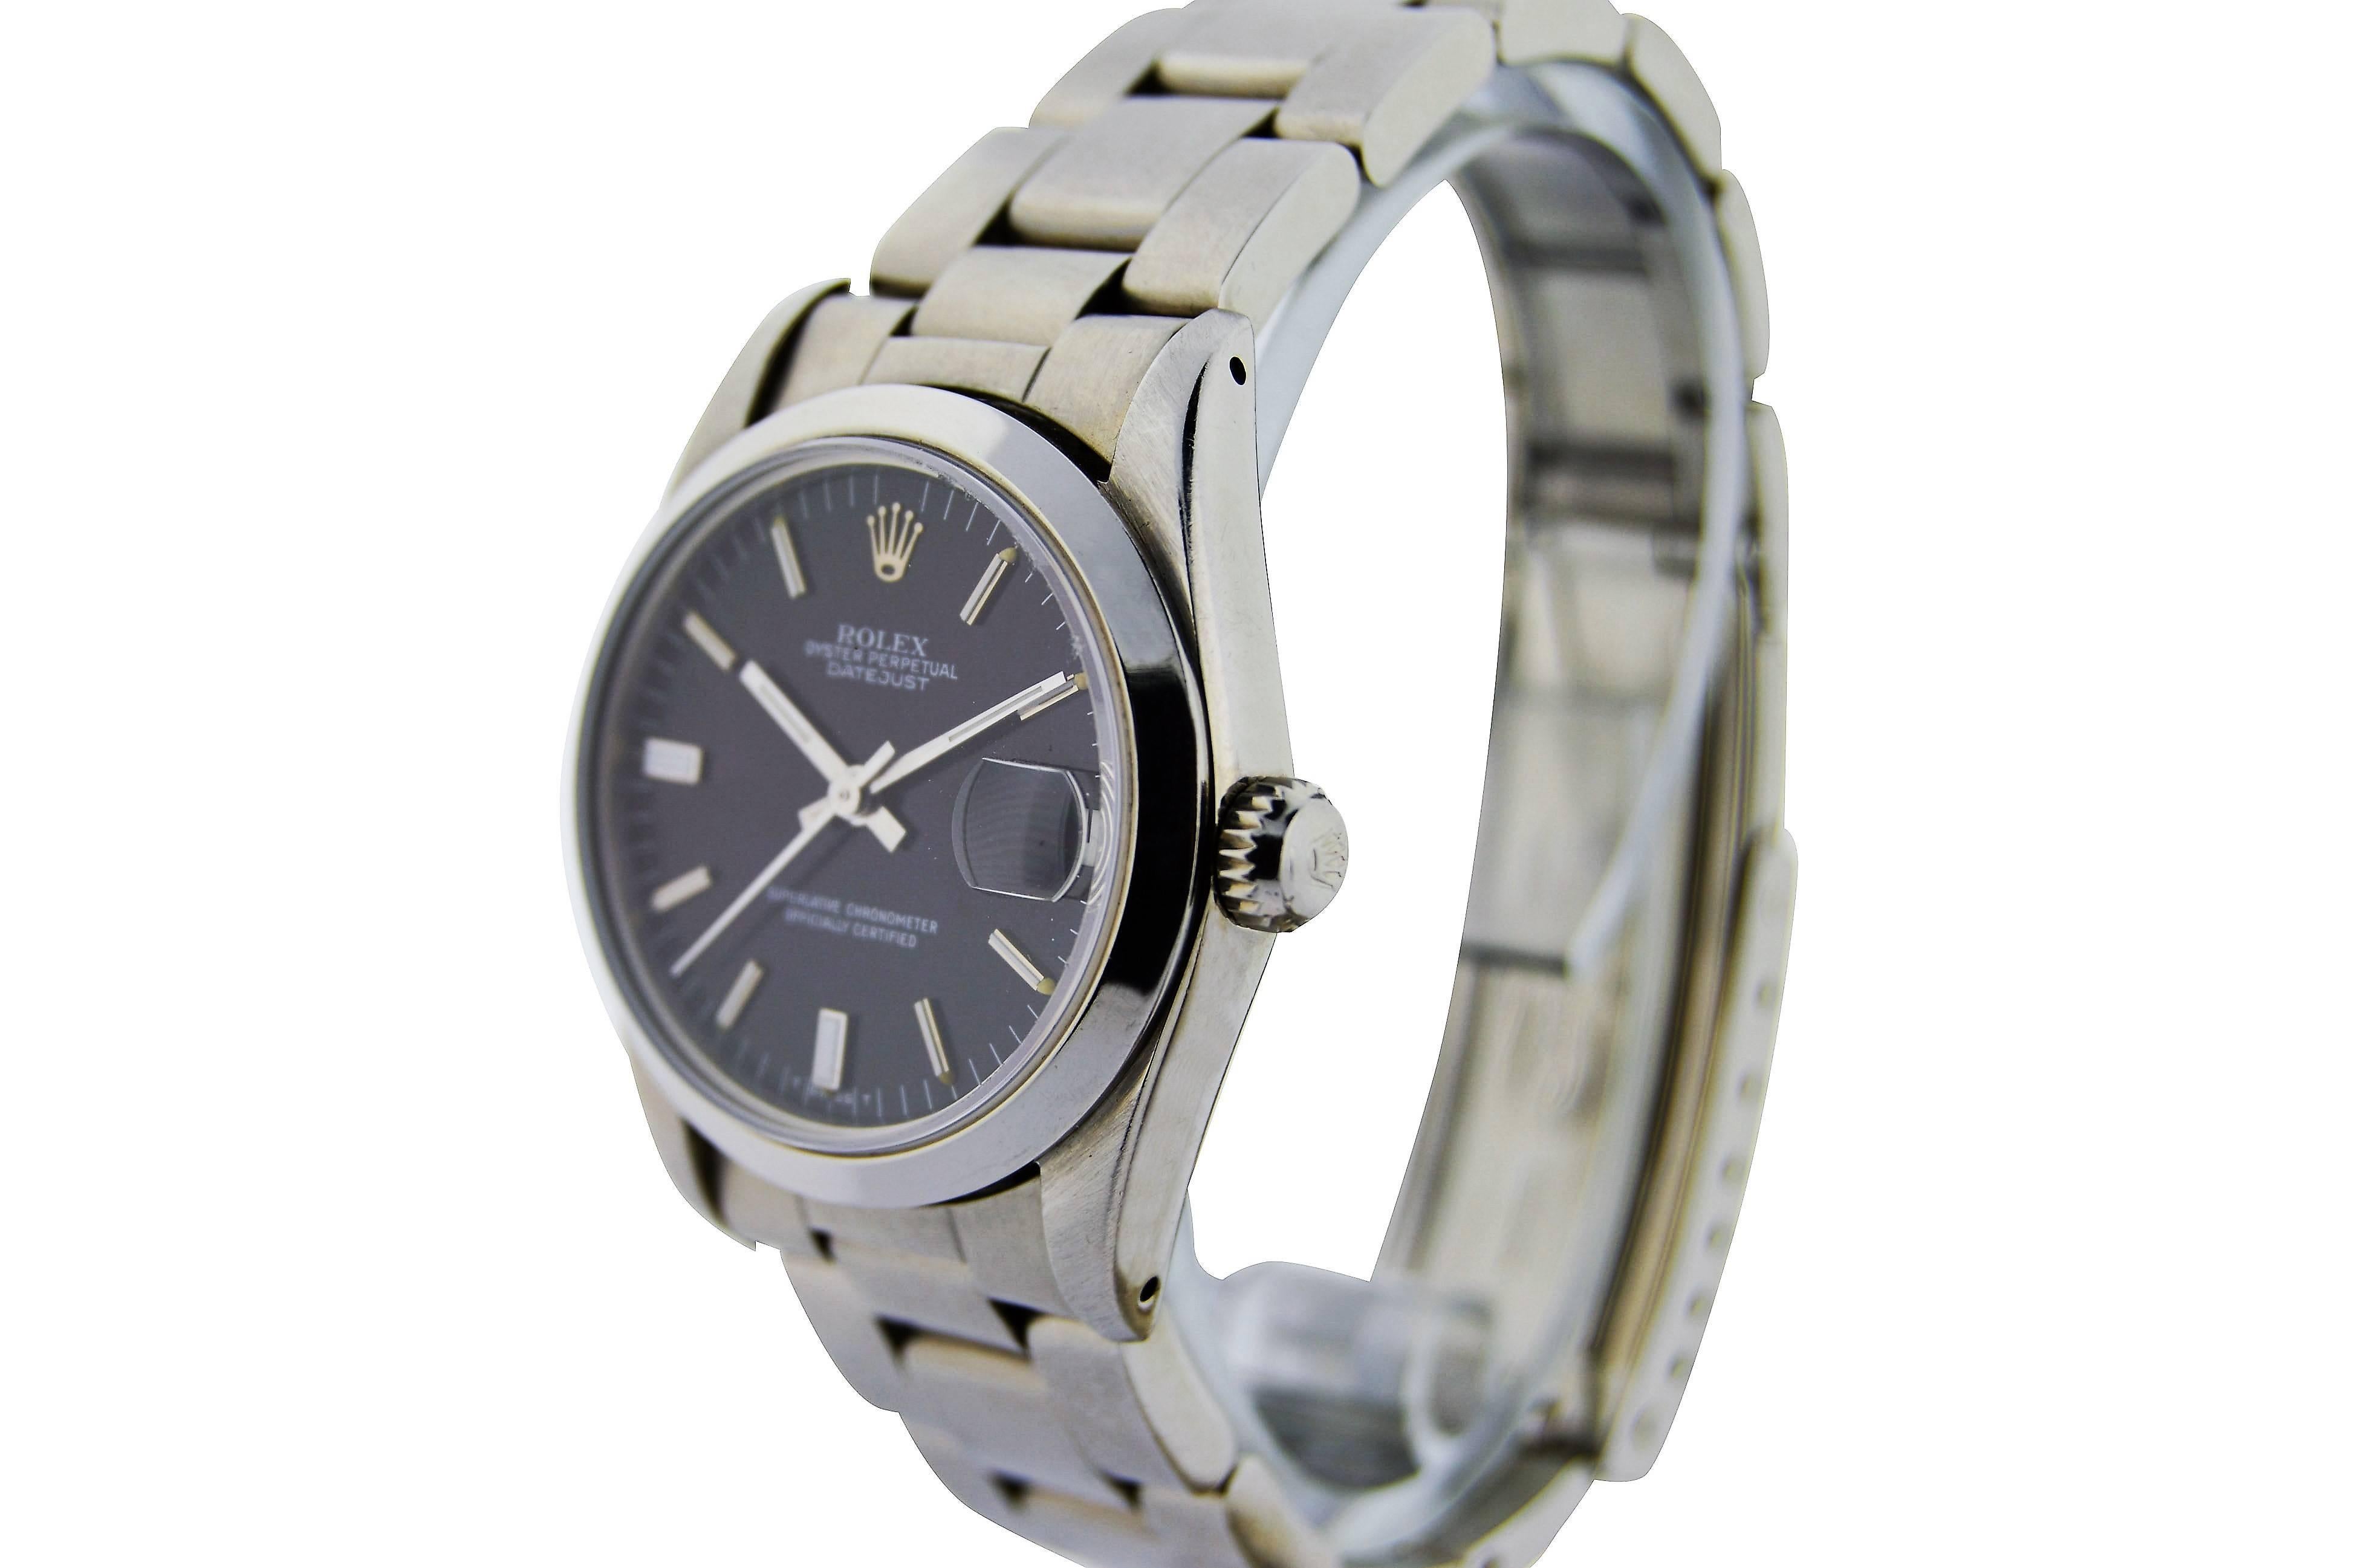 FACTORY / HOUSE: Rolex Watch Company
STYLE / REFERENCE: Oyster Perpetual / Midsize
METAL / MATERIAL: Stainless Steel 
DIMENSIONS: 35mm X 30mm
CIRCA: 2000 plus
MOVEMENT / CALIBER: Perpetual Winding / 26 Jewels 
DIAL / HANDS: Original Black with Baton